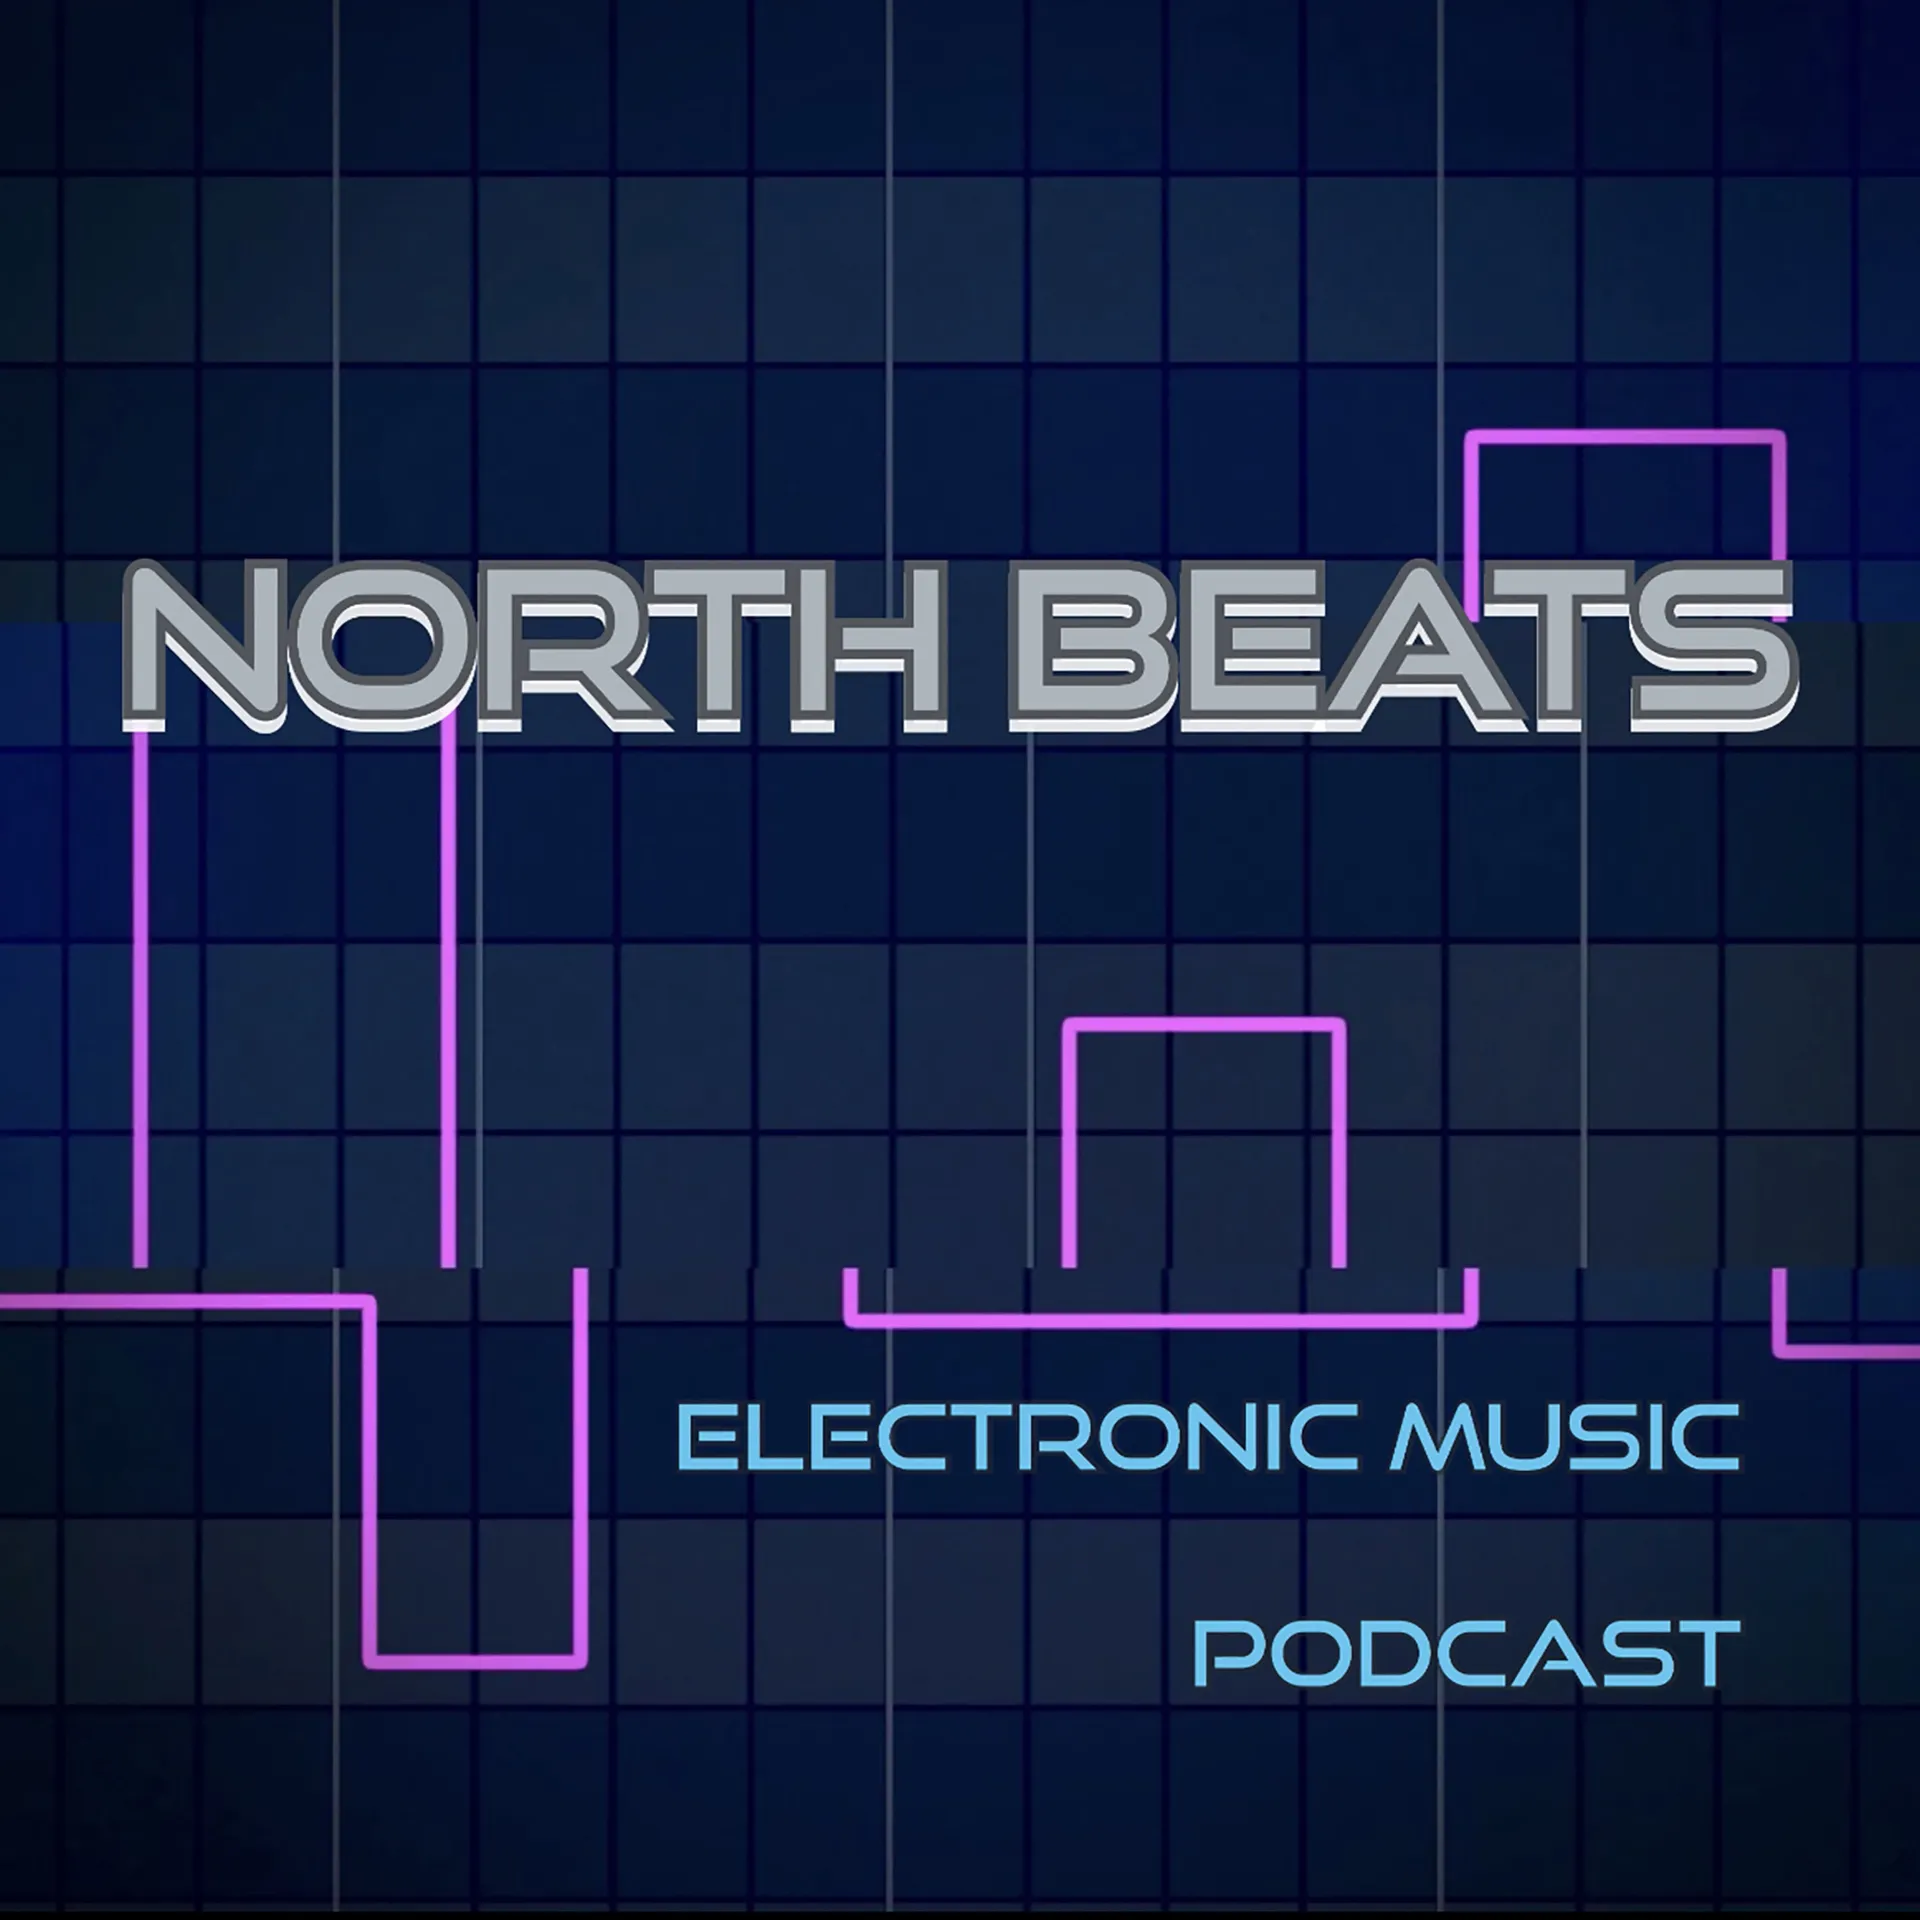 Peter Nyboer interview on North Beats podcast